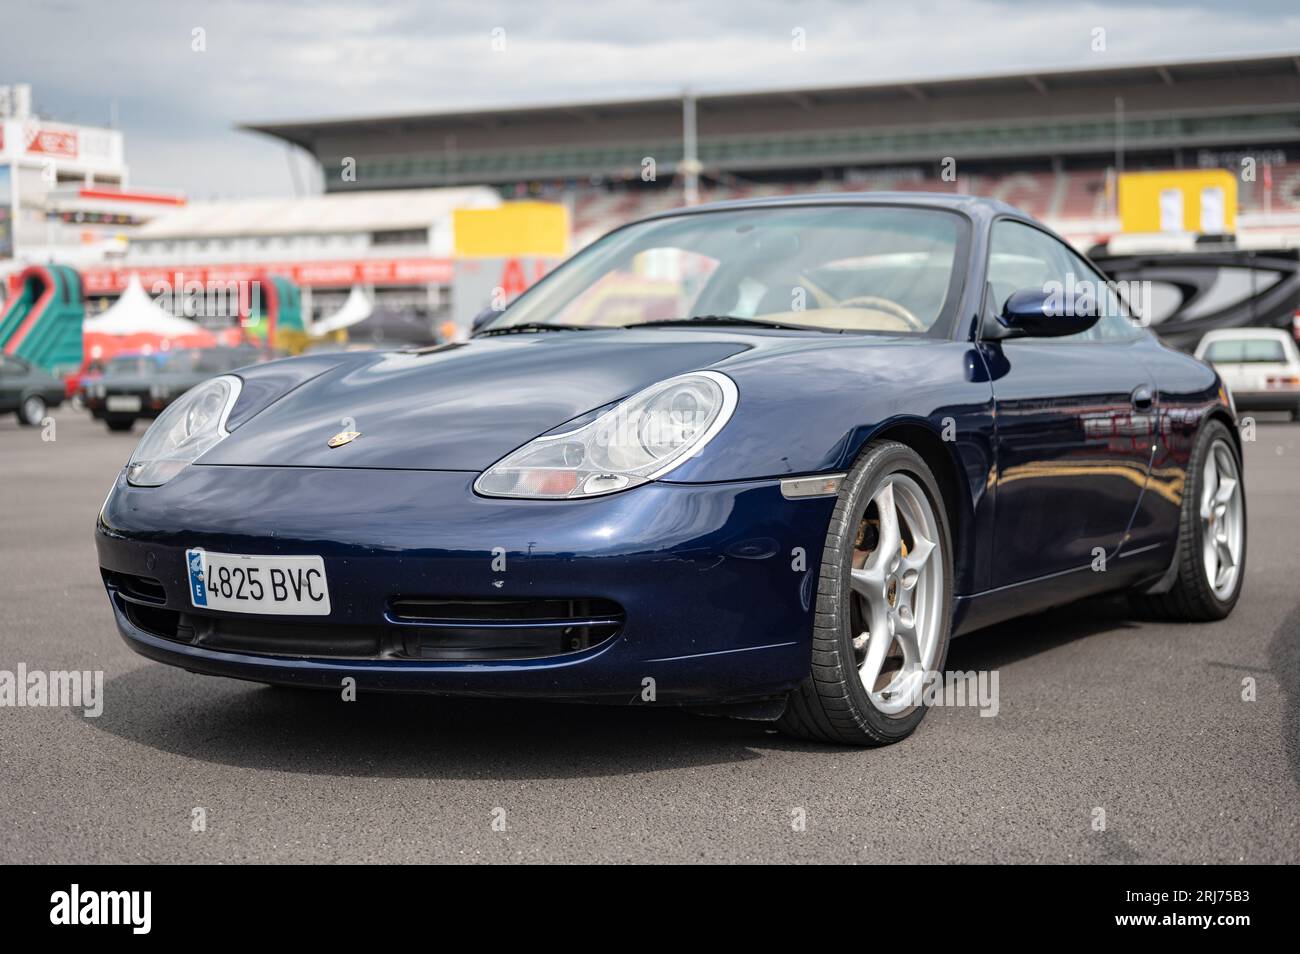 Front view of classic sports car Porsche 996 Carrera in blue color Stock Photo